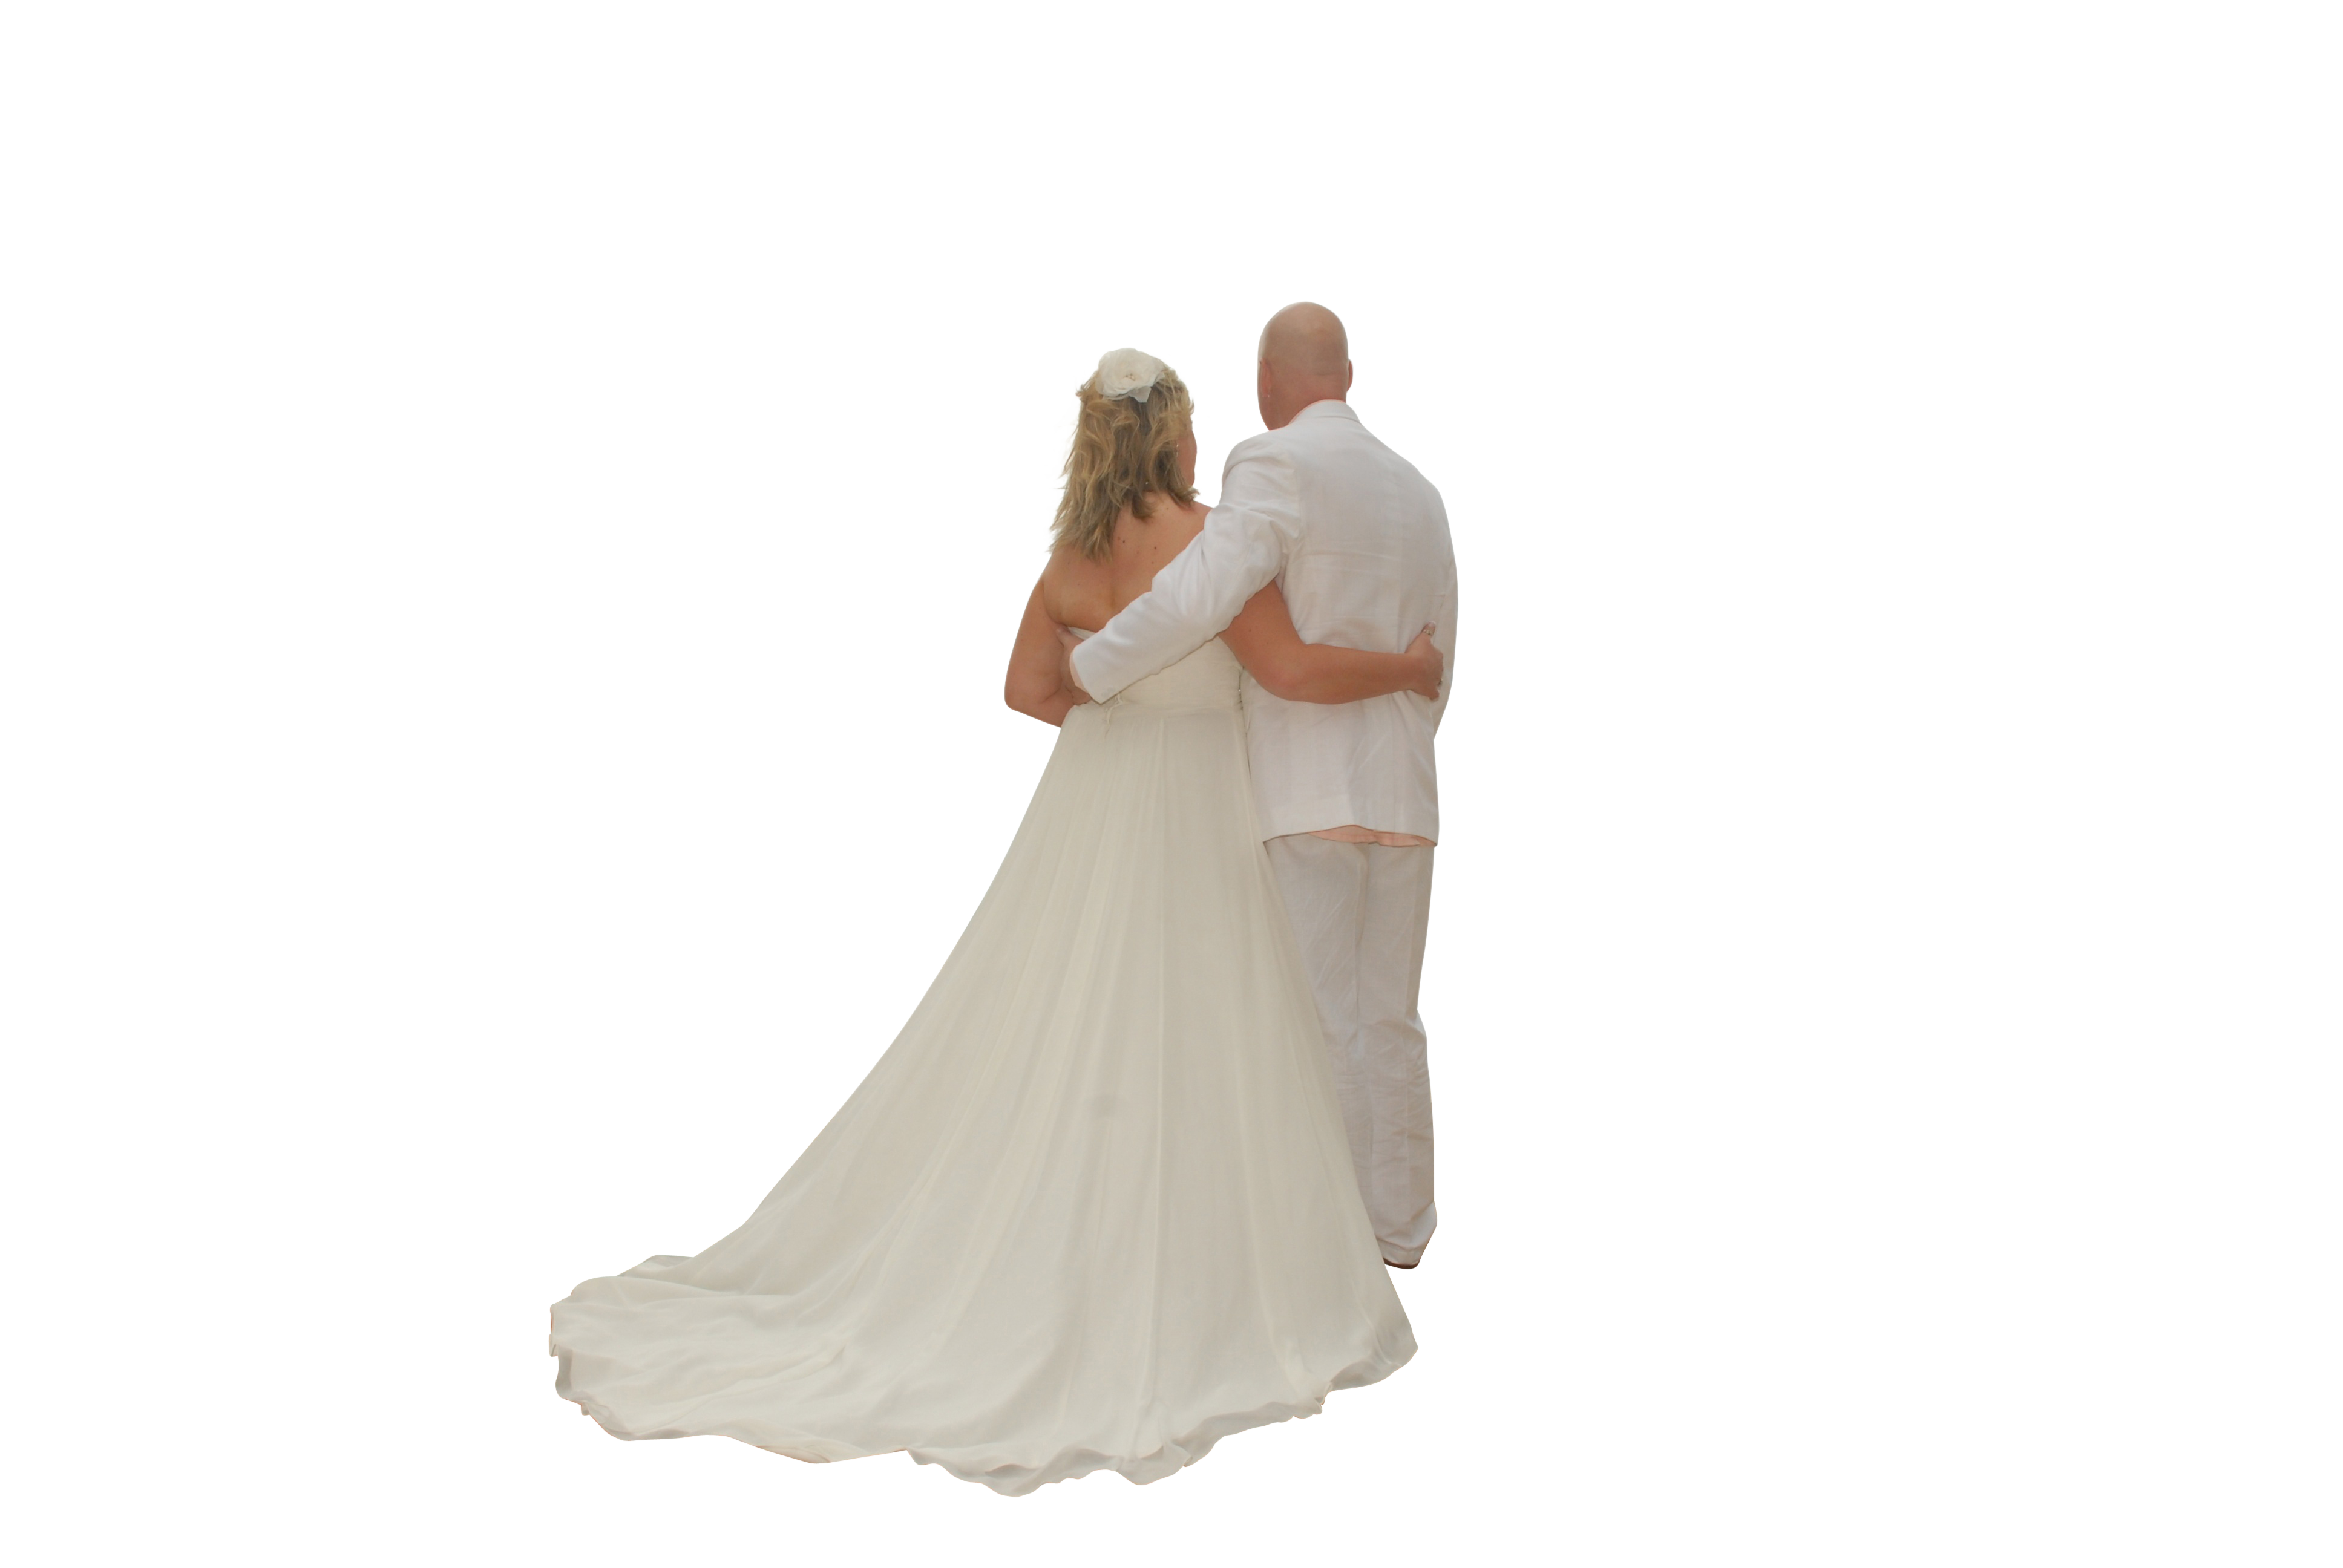 A Man And Woman In White Dress Hugging